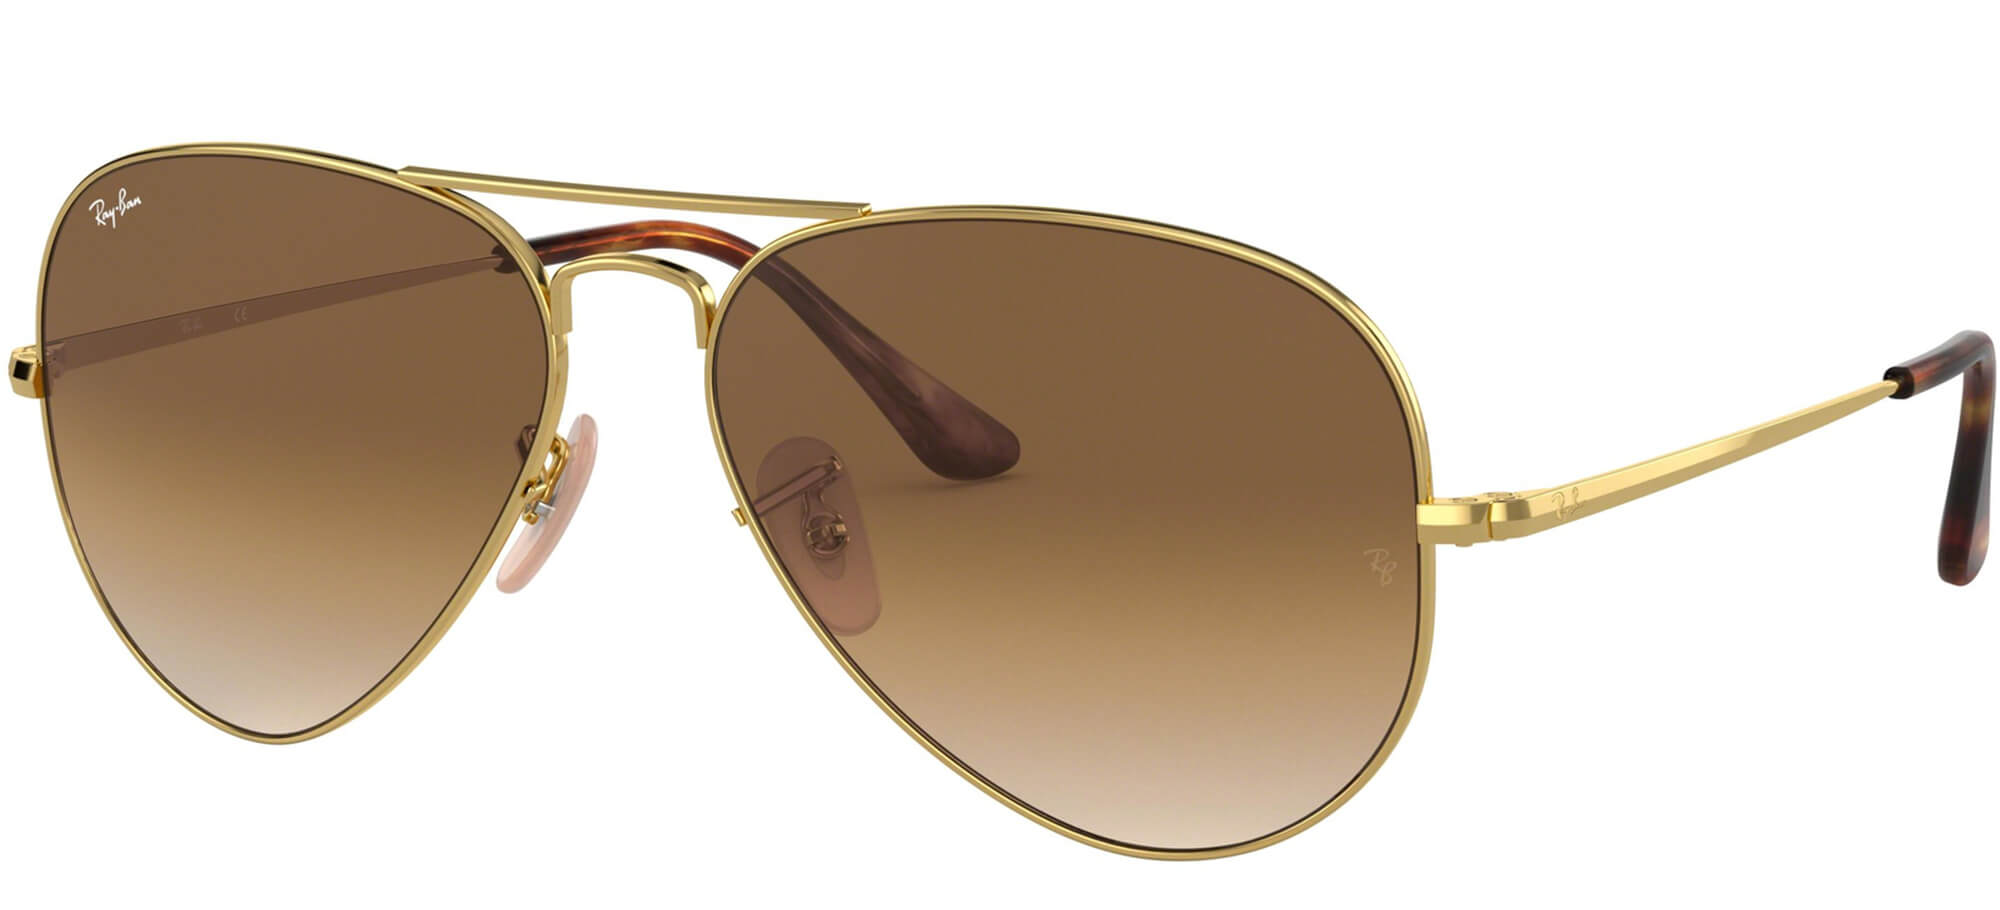 Ray-BanRB 3689Gold/brown Shaded (9147/51)